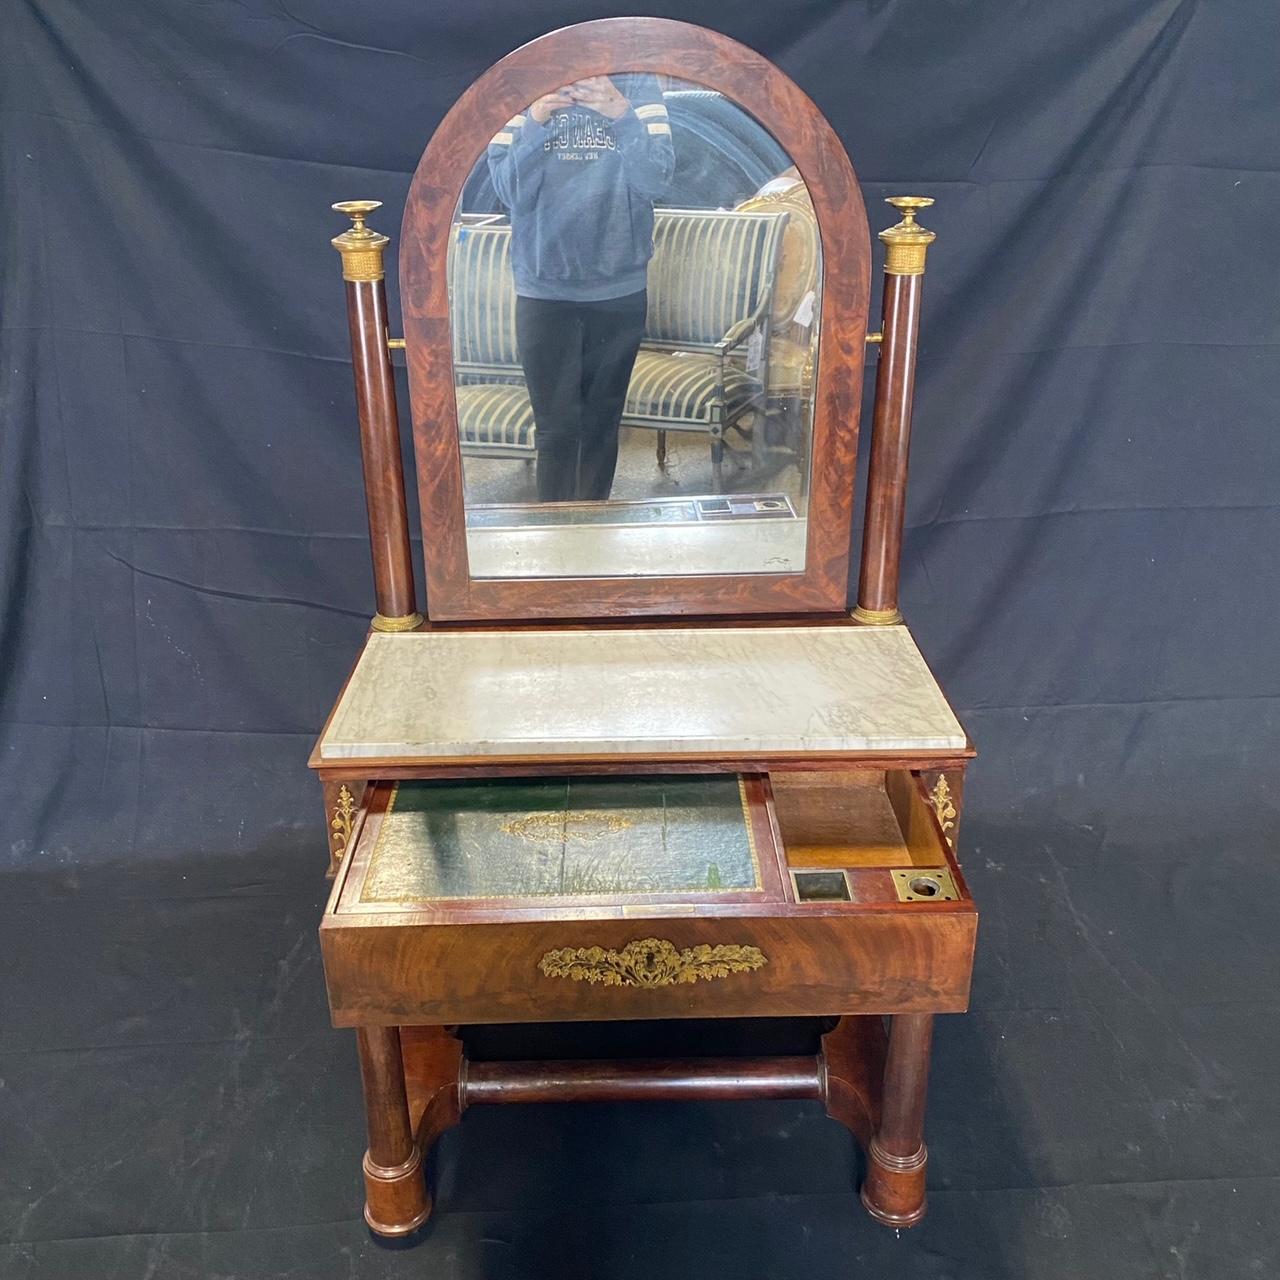 Beautiful French 19th century Empire marble top mahogany dressing table or vanity featuring an arch design adjustable mirror held by two wood columns accentuated by brass finials on top, intricate bronze details throughout the entire piece, and a